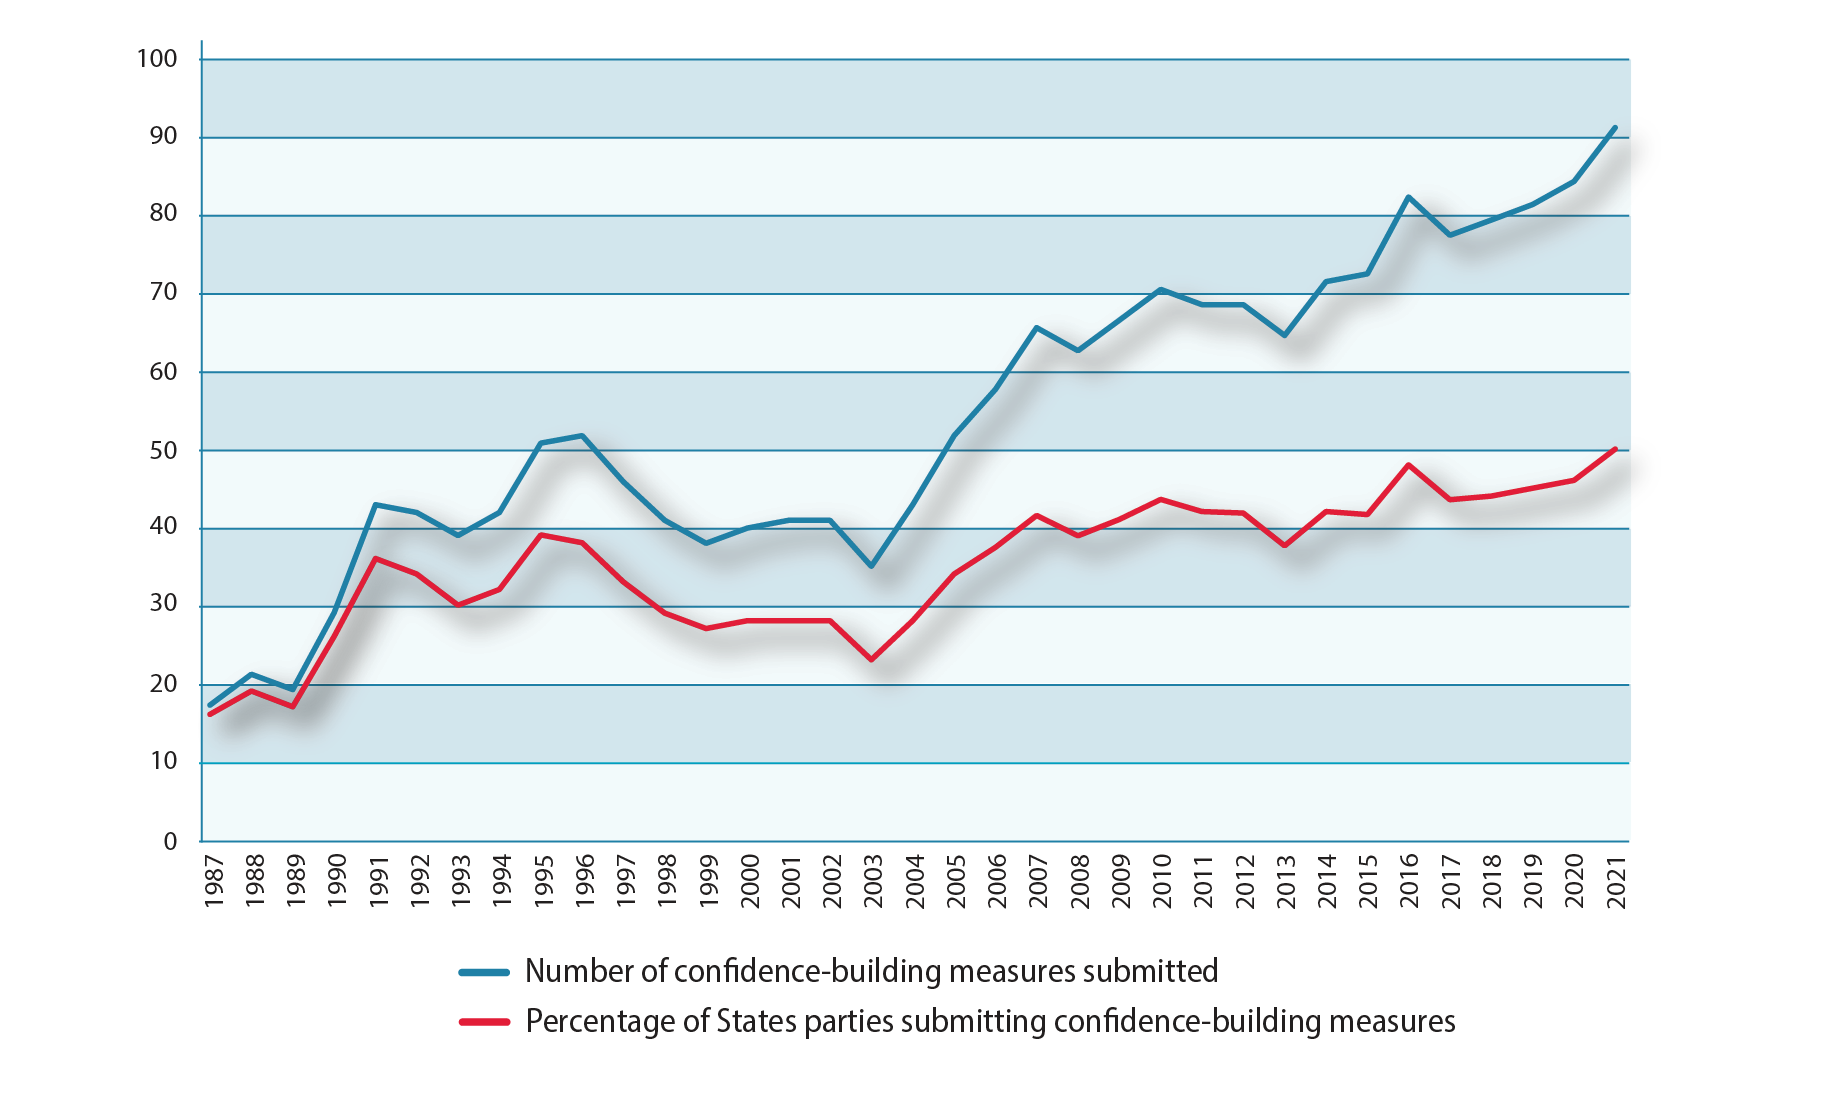 Line graph showing number of confidence-building measures and percentage of States parties submitting confidence-building measures from 1987 to 2021